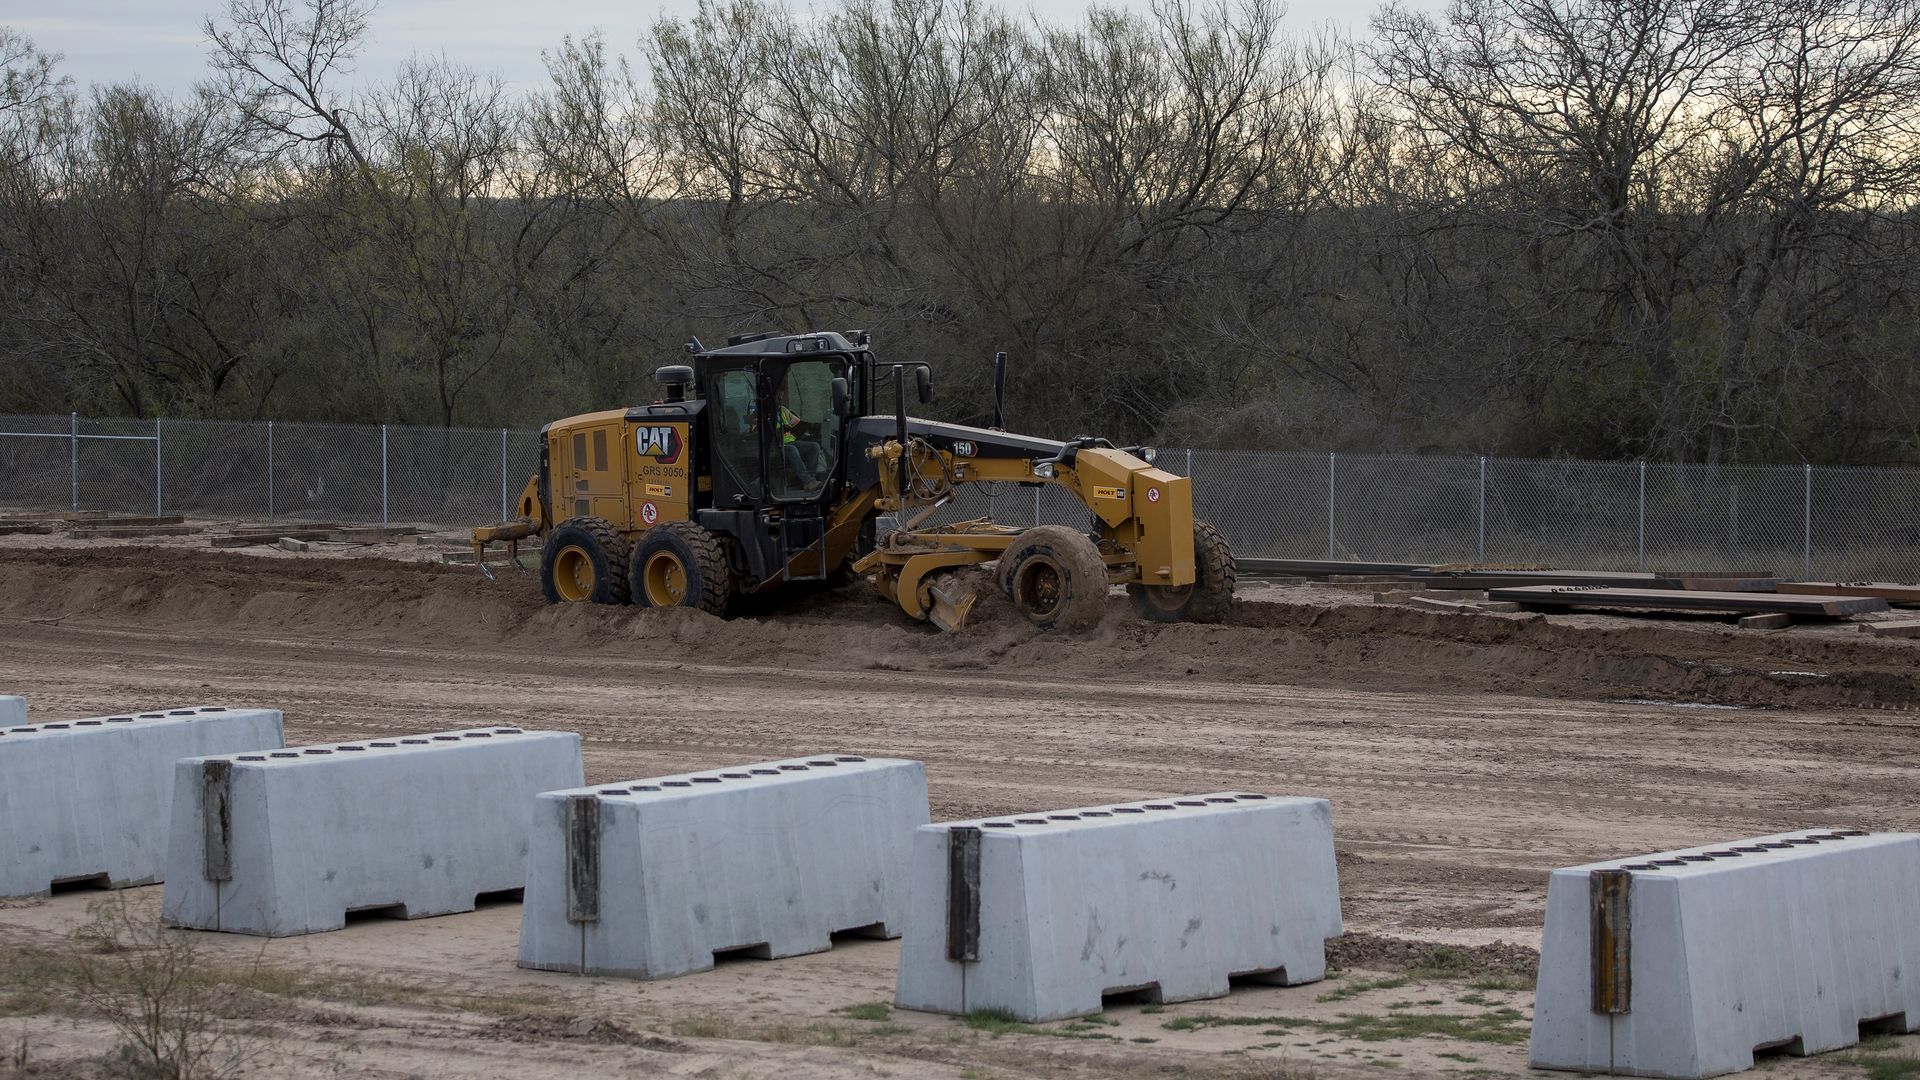 Construction work on the border wall in Texas